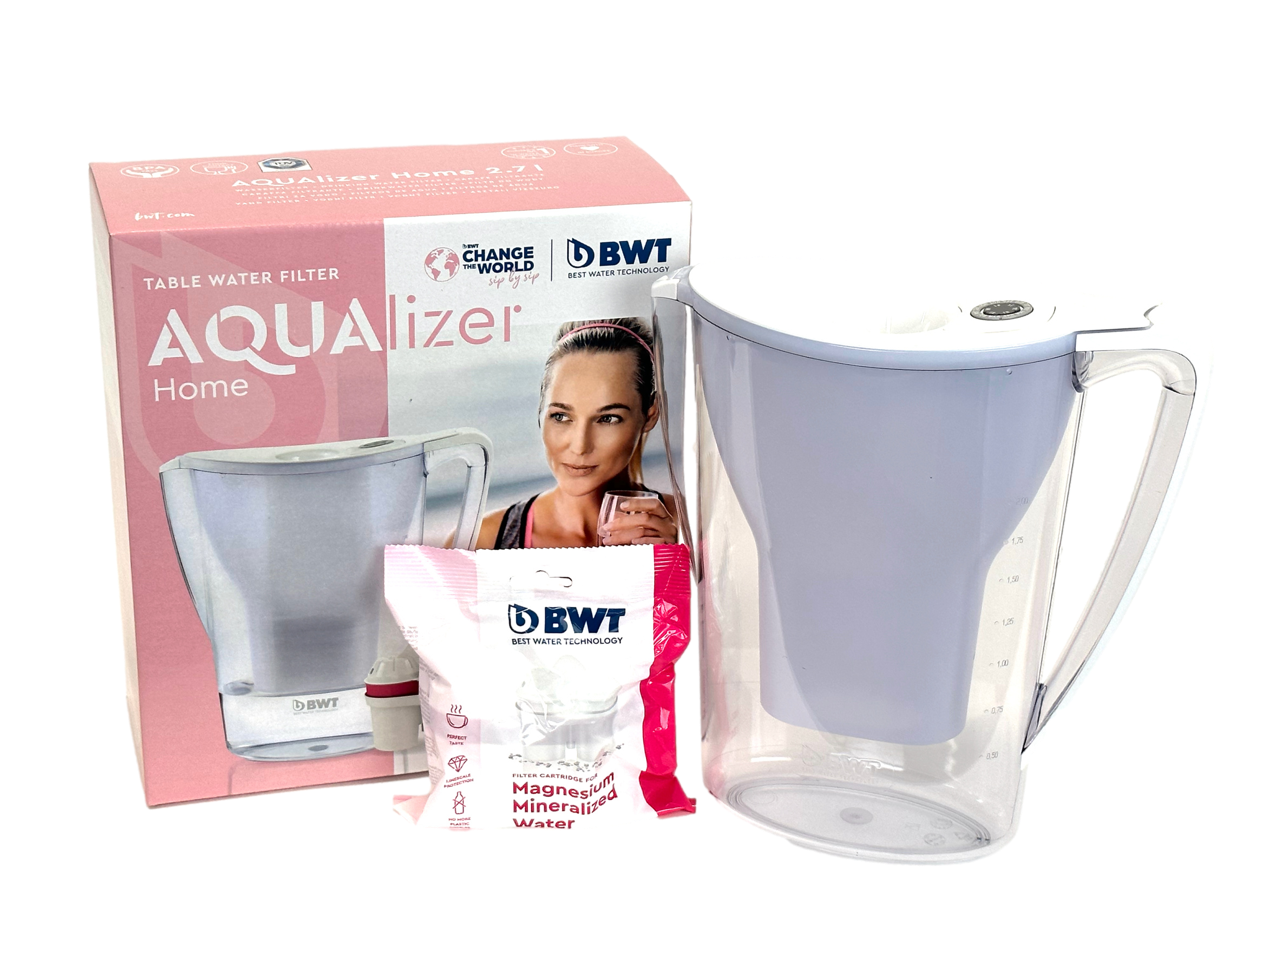 BWT FILTER WATER JUG 2.7 LITRE with 1 Free Filter Cartridges